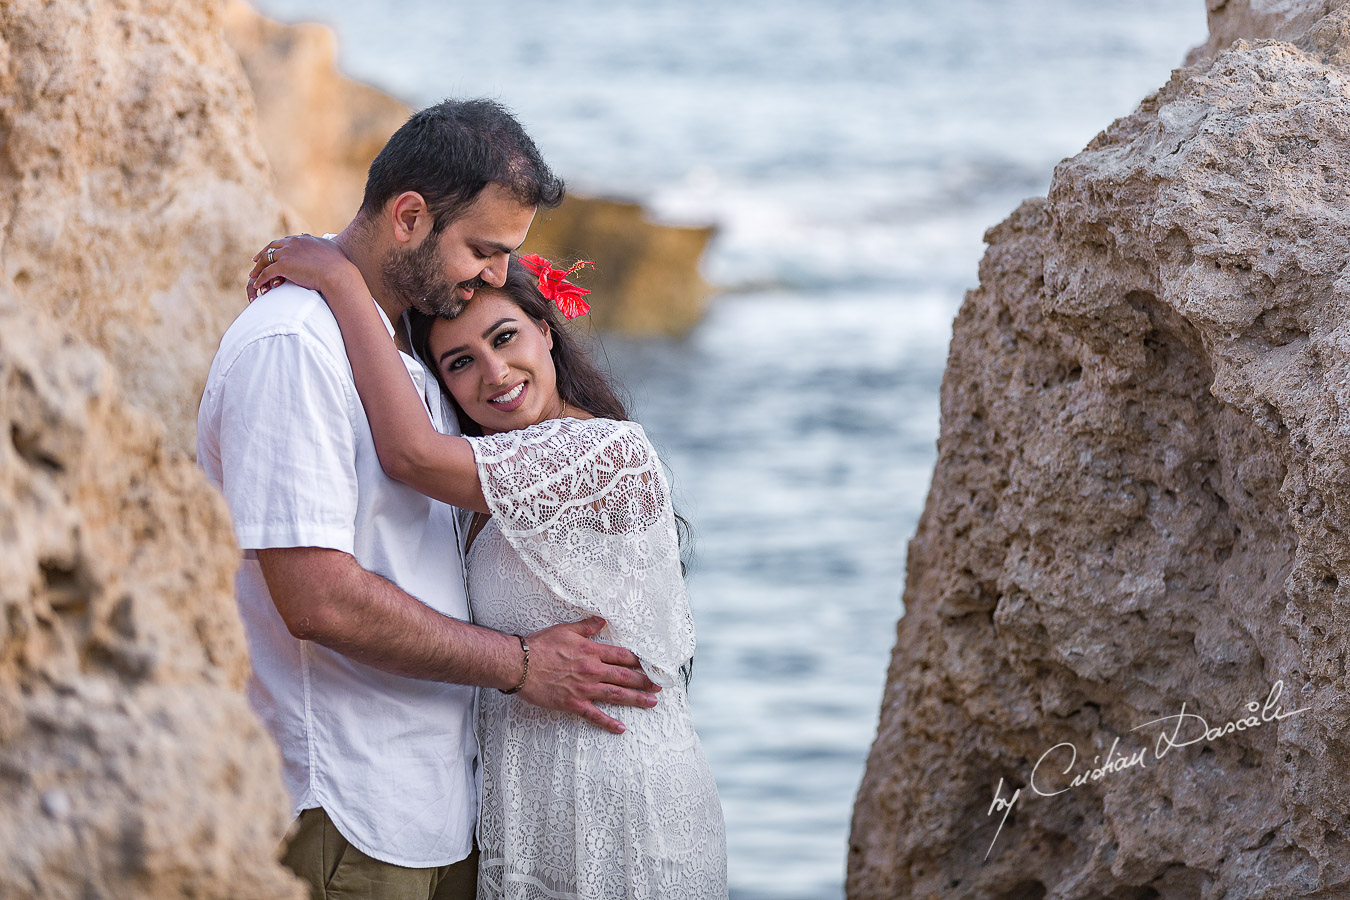 Beautiful Sucheta photogrpahed together with Vikram at the luxurious King Evelthon Hotel in Paphos, Cyprus.